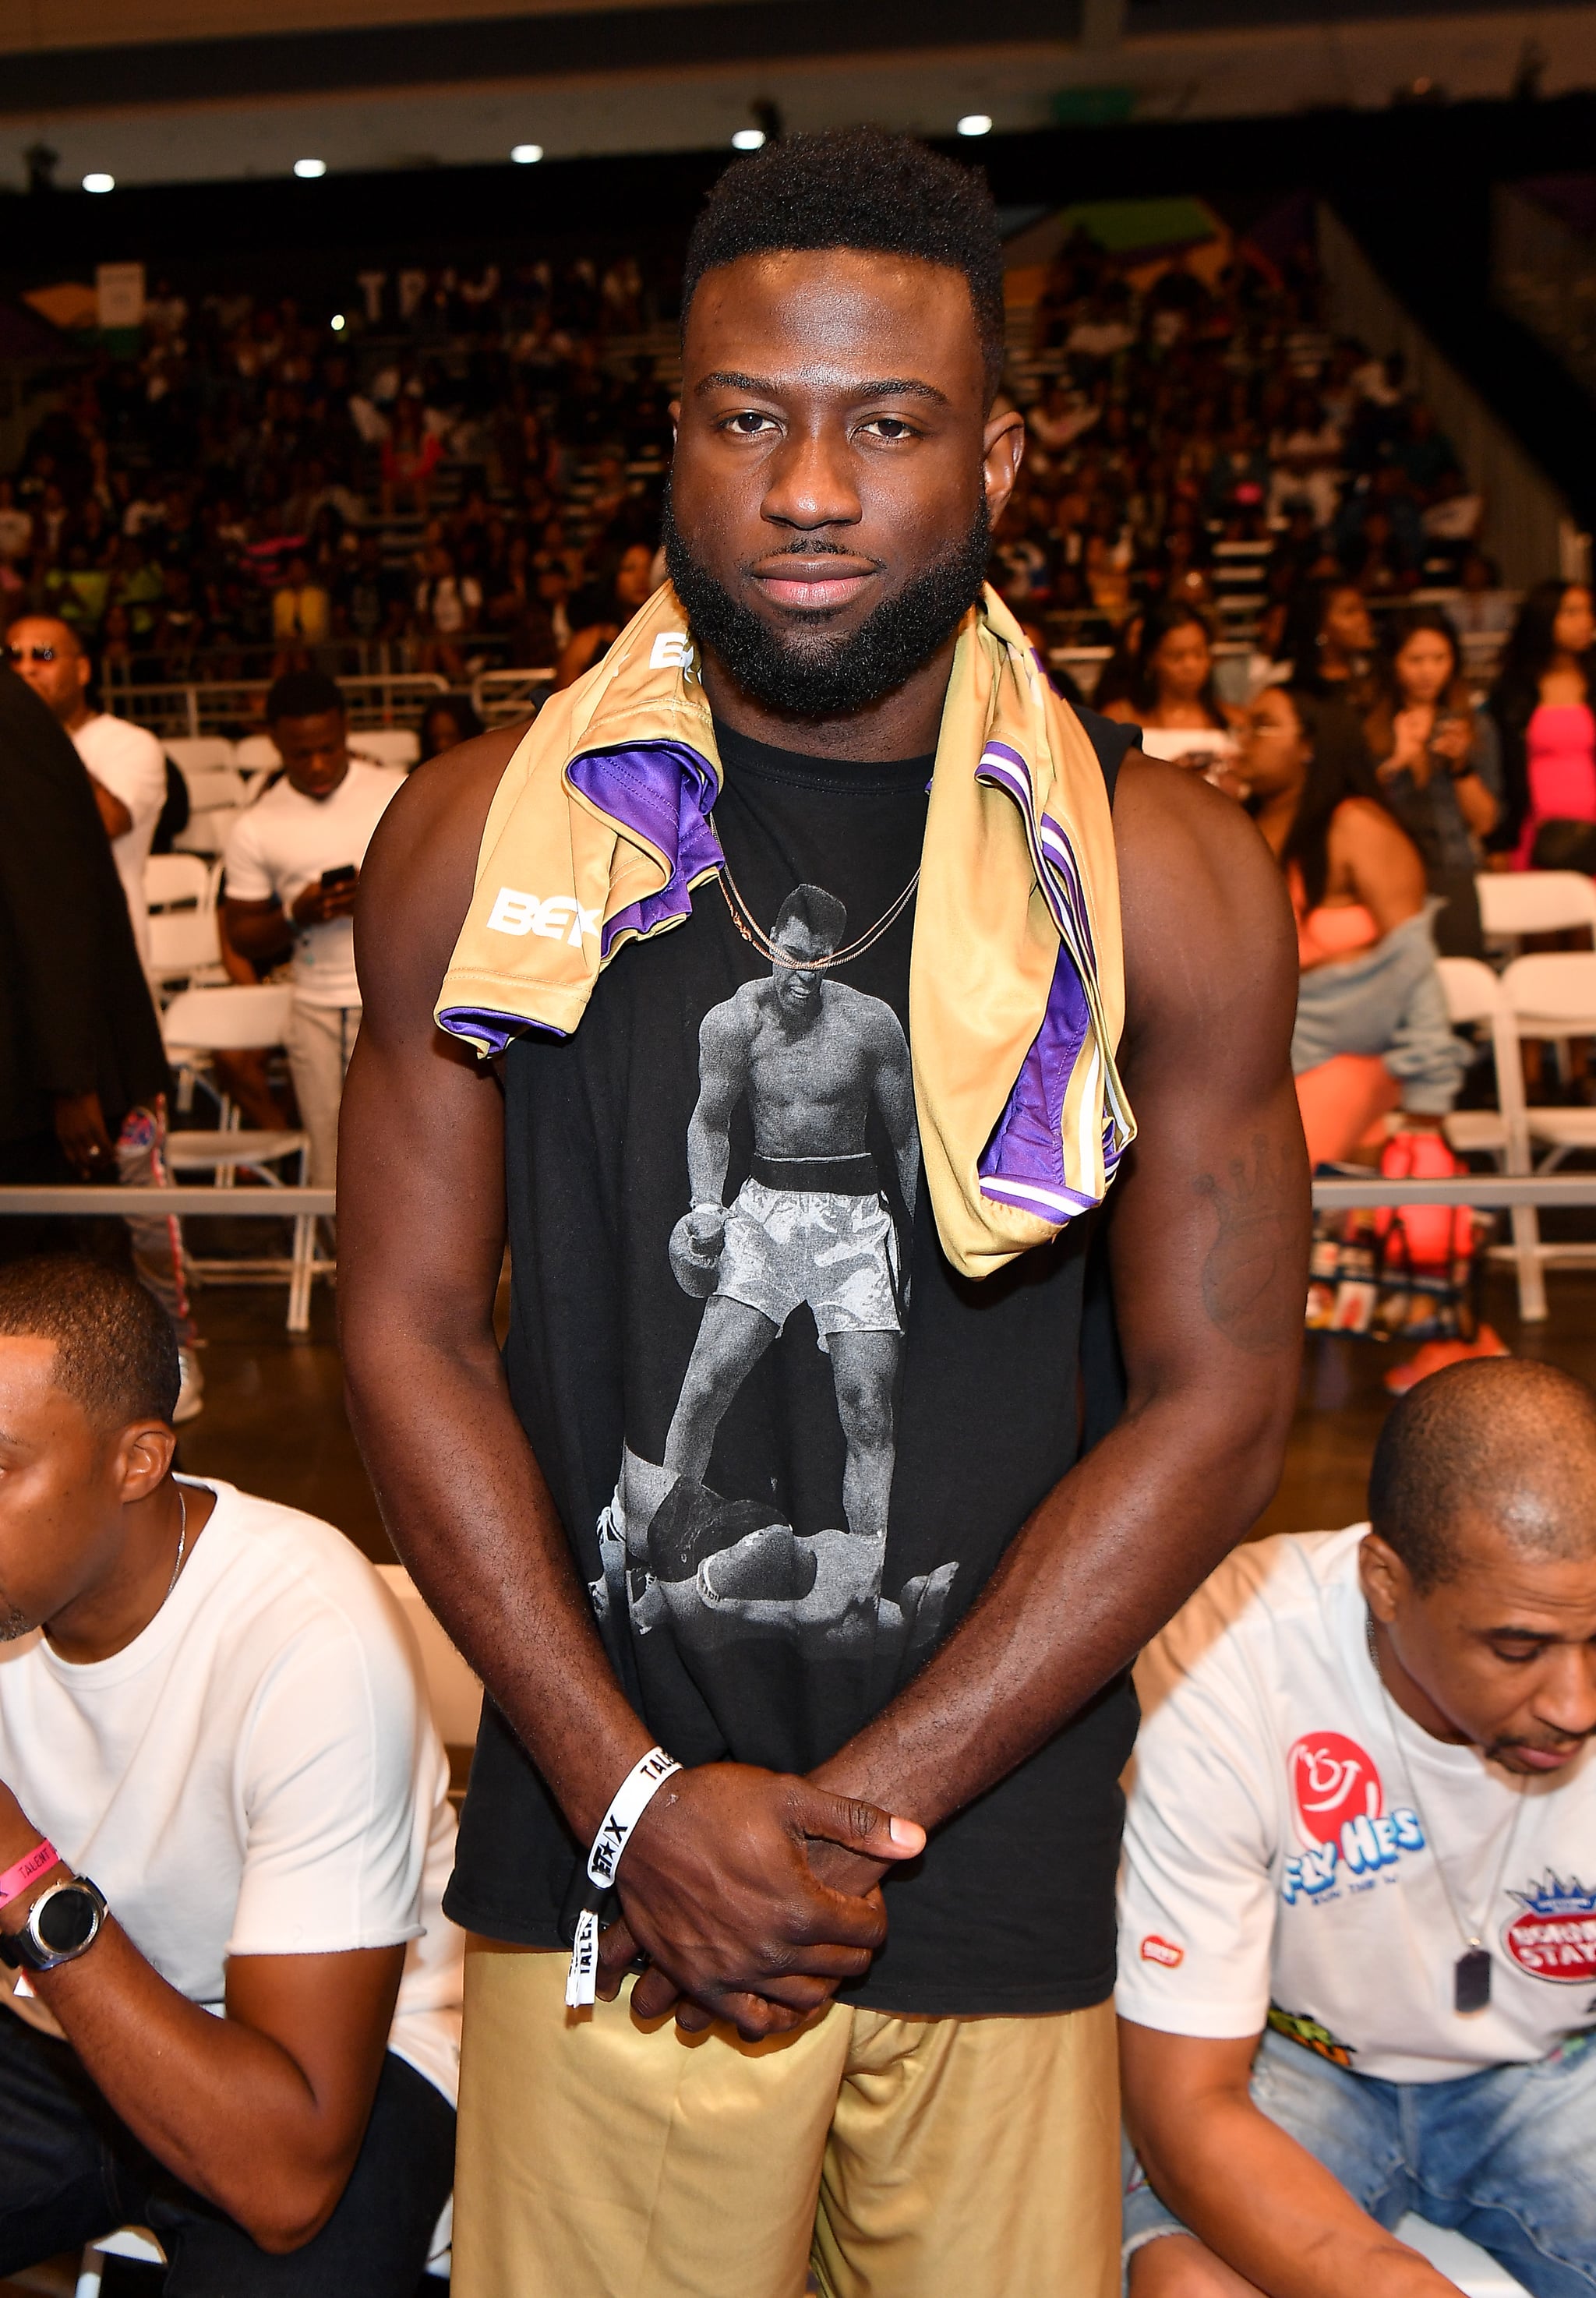 LOS ANGELES, CALIFORNIA - JUNE 22: Sinqua Walls plays in the BETX Celebrity Basketball Game Sponsored By Sprite during the BET Experience at Los Angeles Convention Center on June 22, 2019 in Los Angeles, California. (Photo by Paras Griffin/Getty Images for BET)